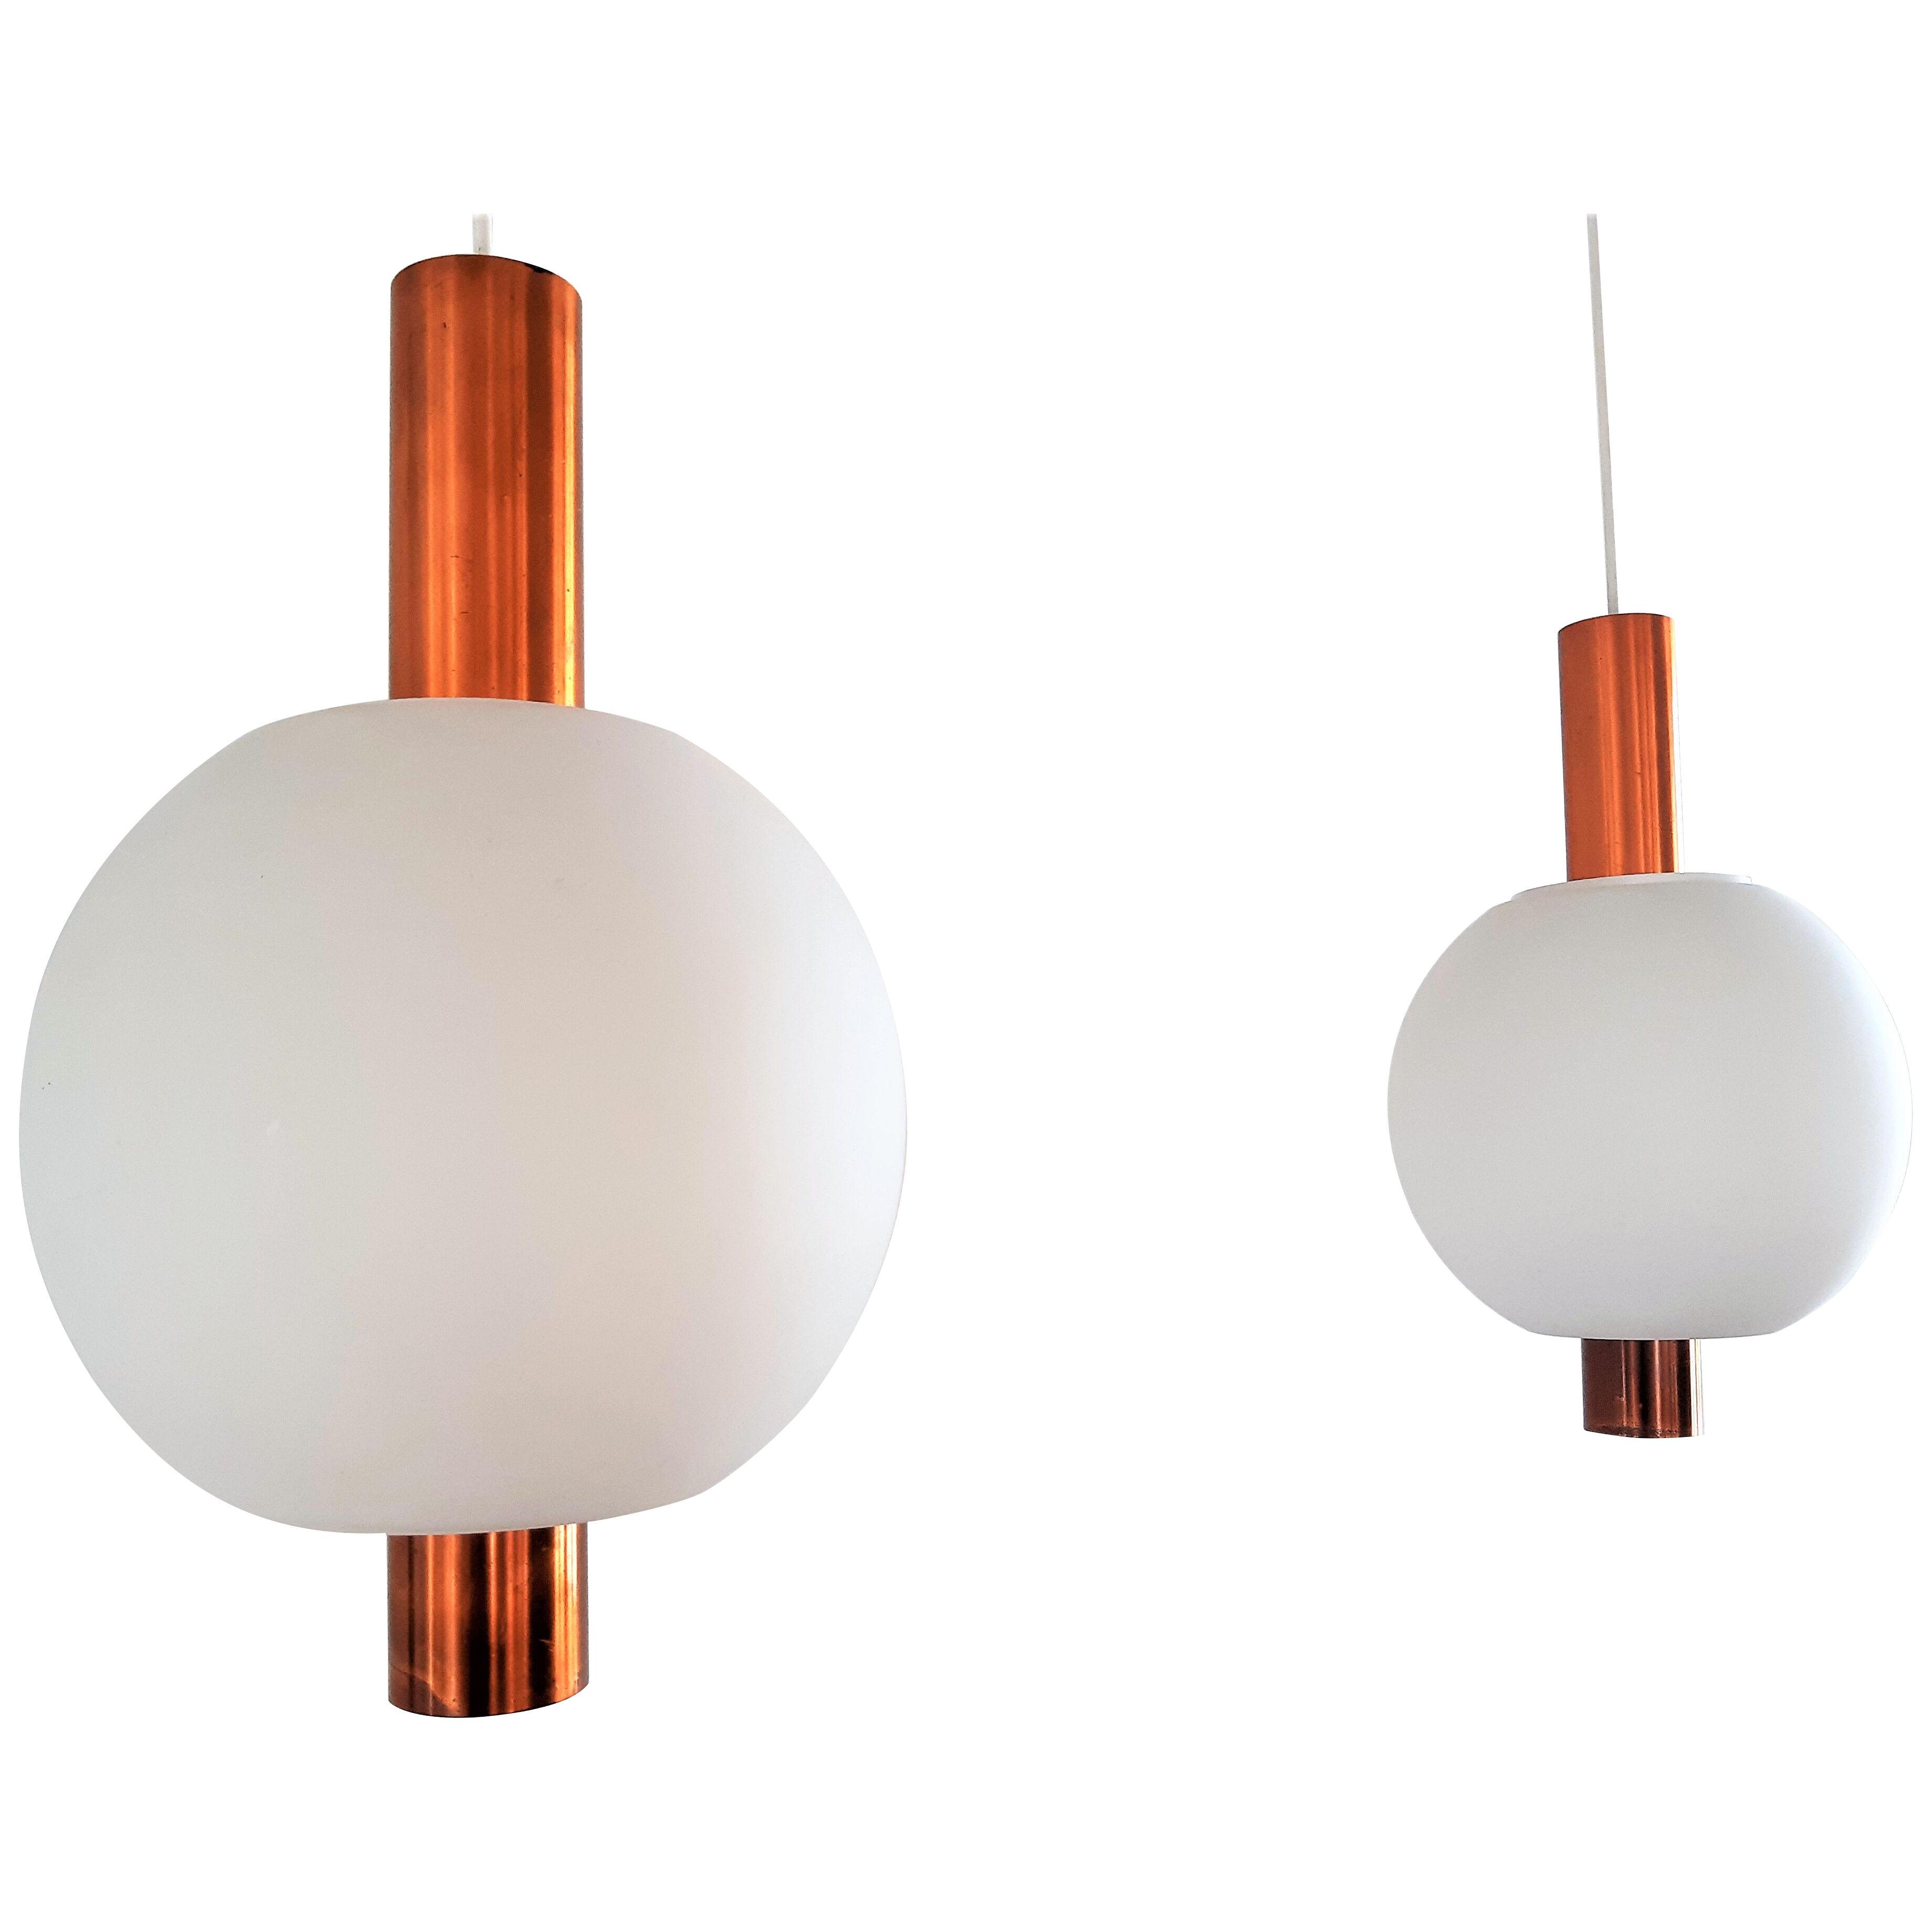 SET OF 2 COPPER AND GLASS PENDANT LAMPS FOR HIEMSRTA EVOLUX, 1960’S